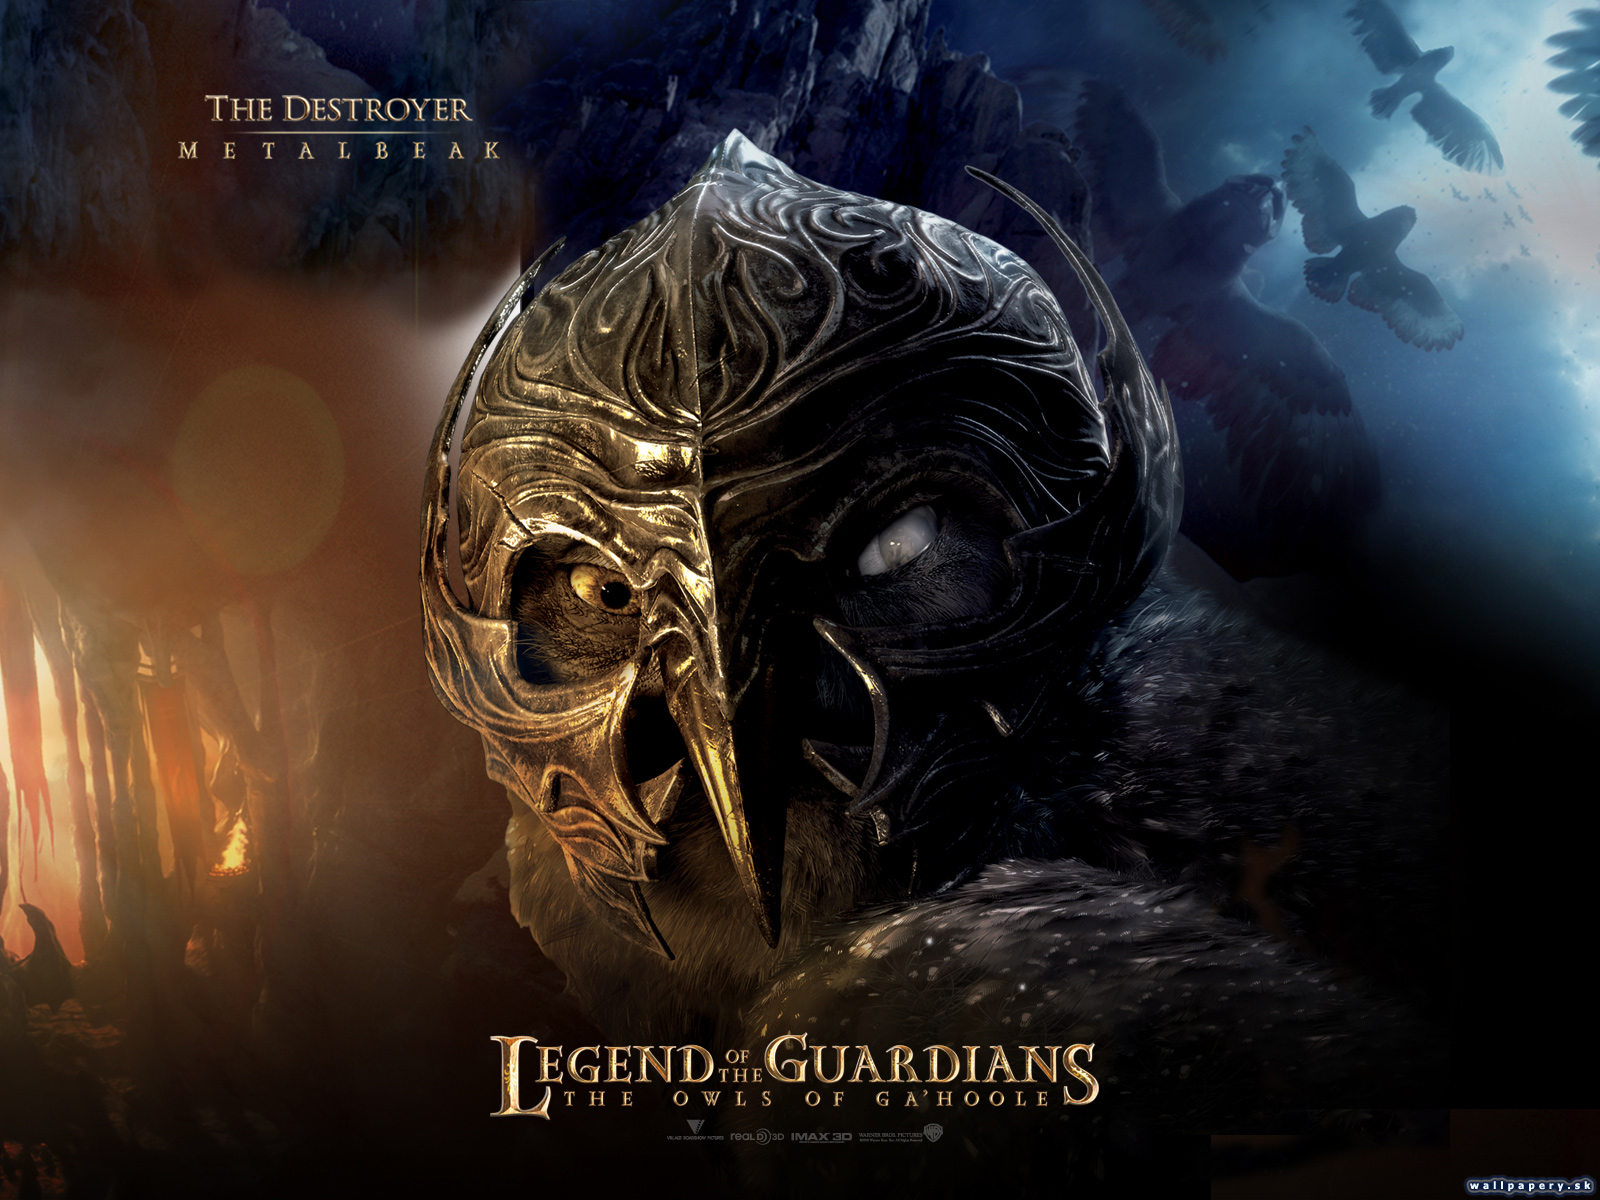 Legend of the Guardians: The Owls of Ga'Hoole - wallpaper 5